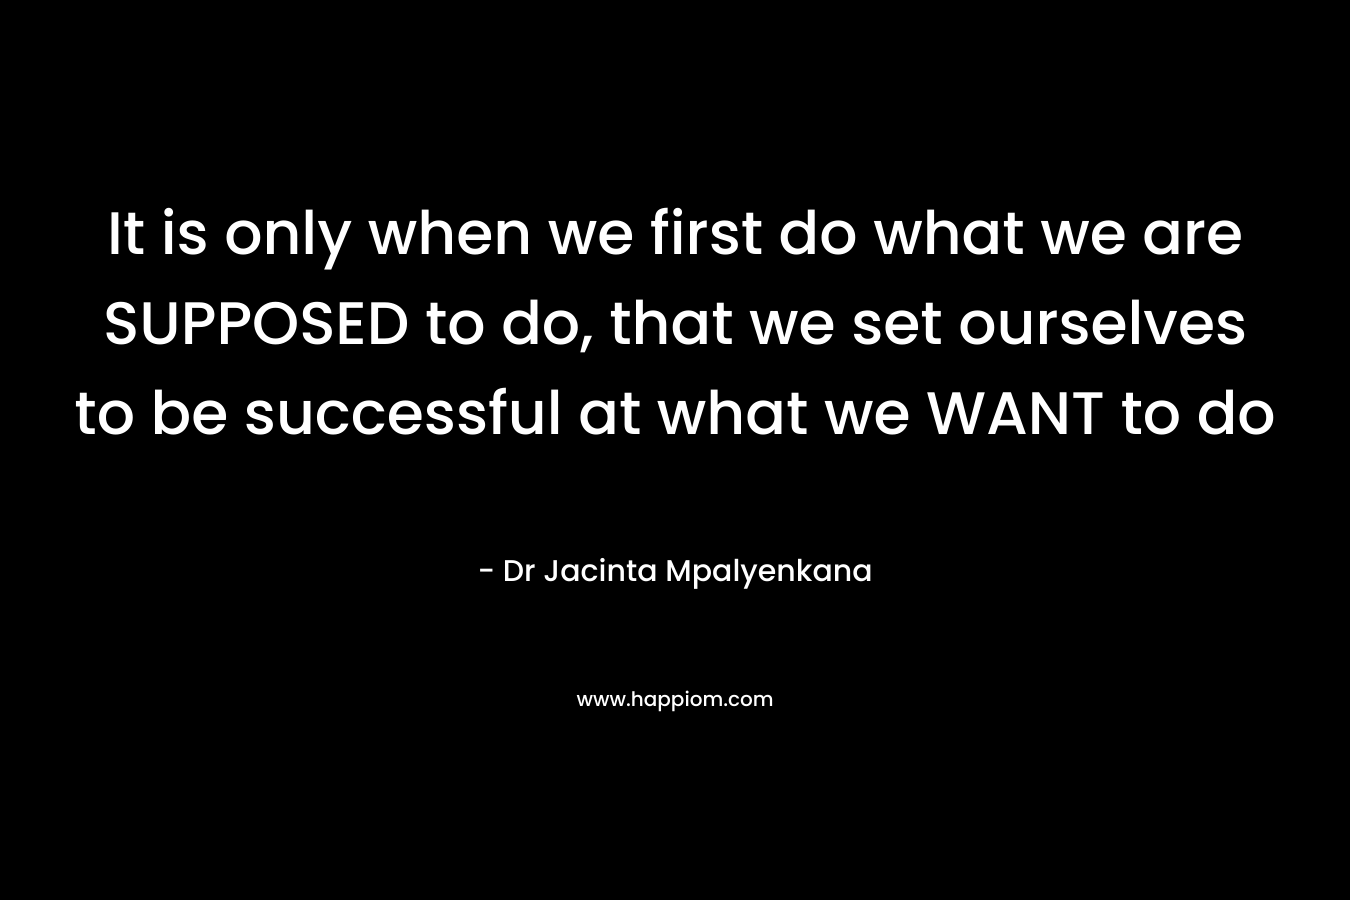 It is only when we first do what we are SUPPOSED to do, that we set ourselves to be successful at what we WANT to do